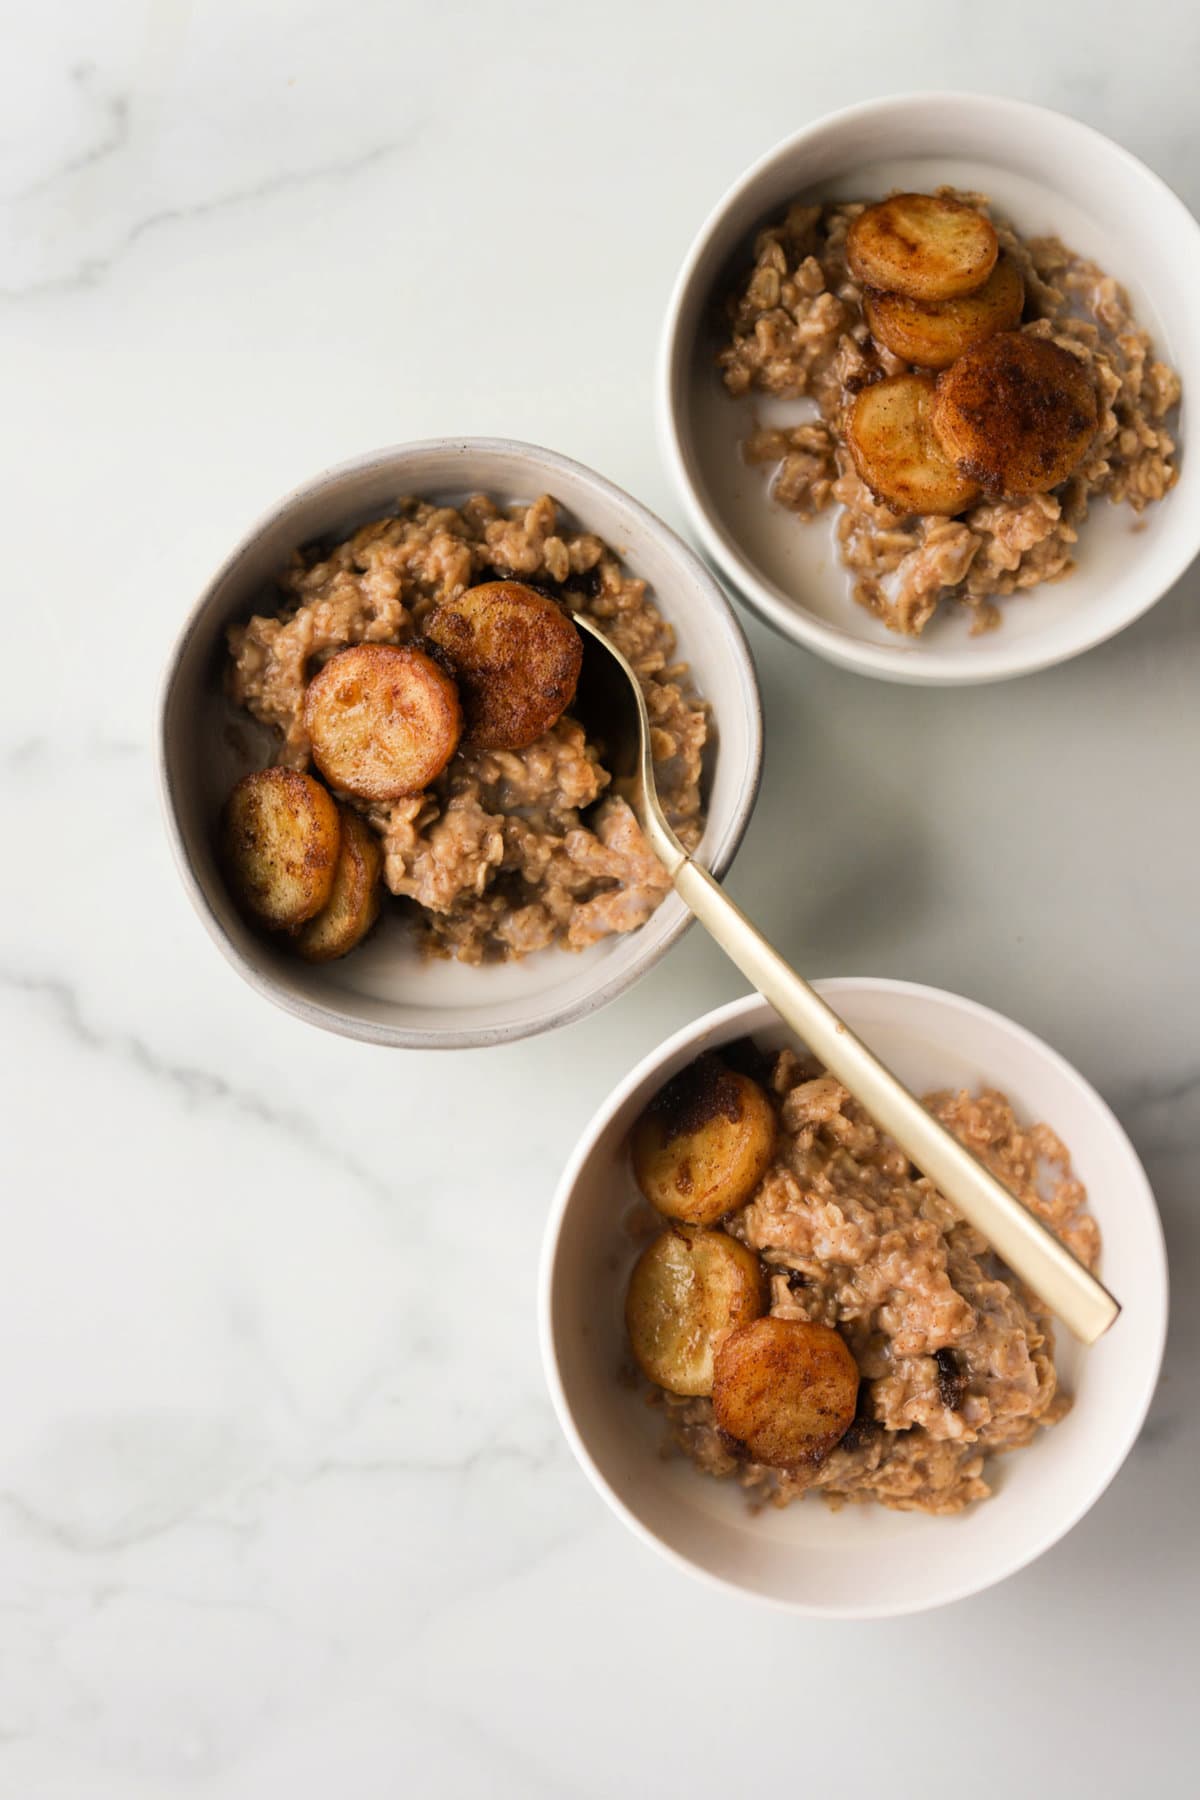 An overhead shot of three bowls of peanut butter oatmeal with caramelized bananas on top.